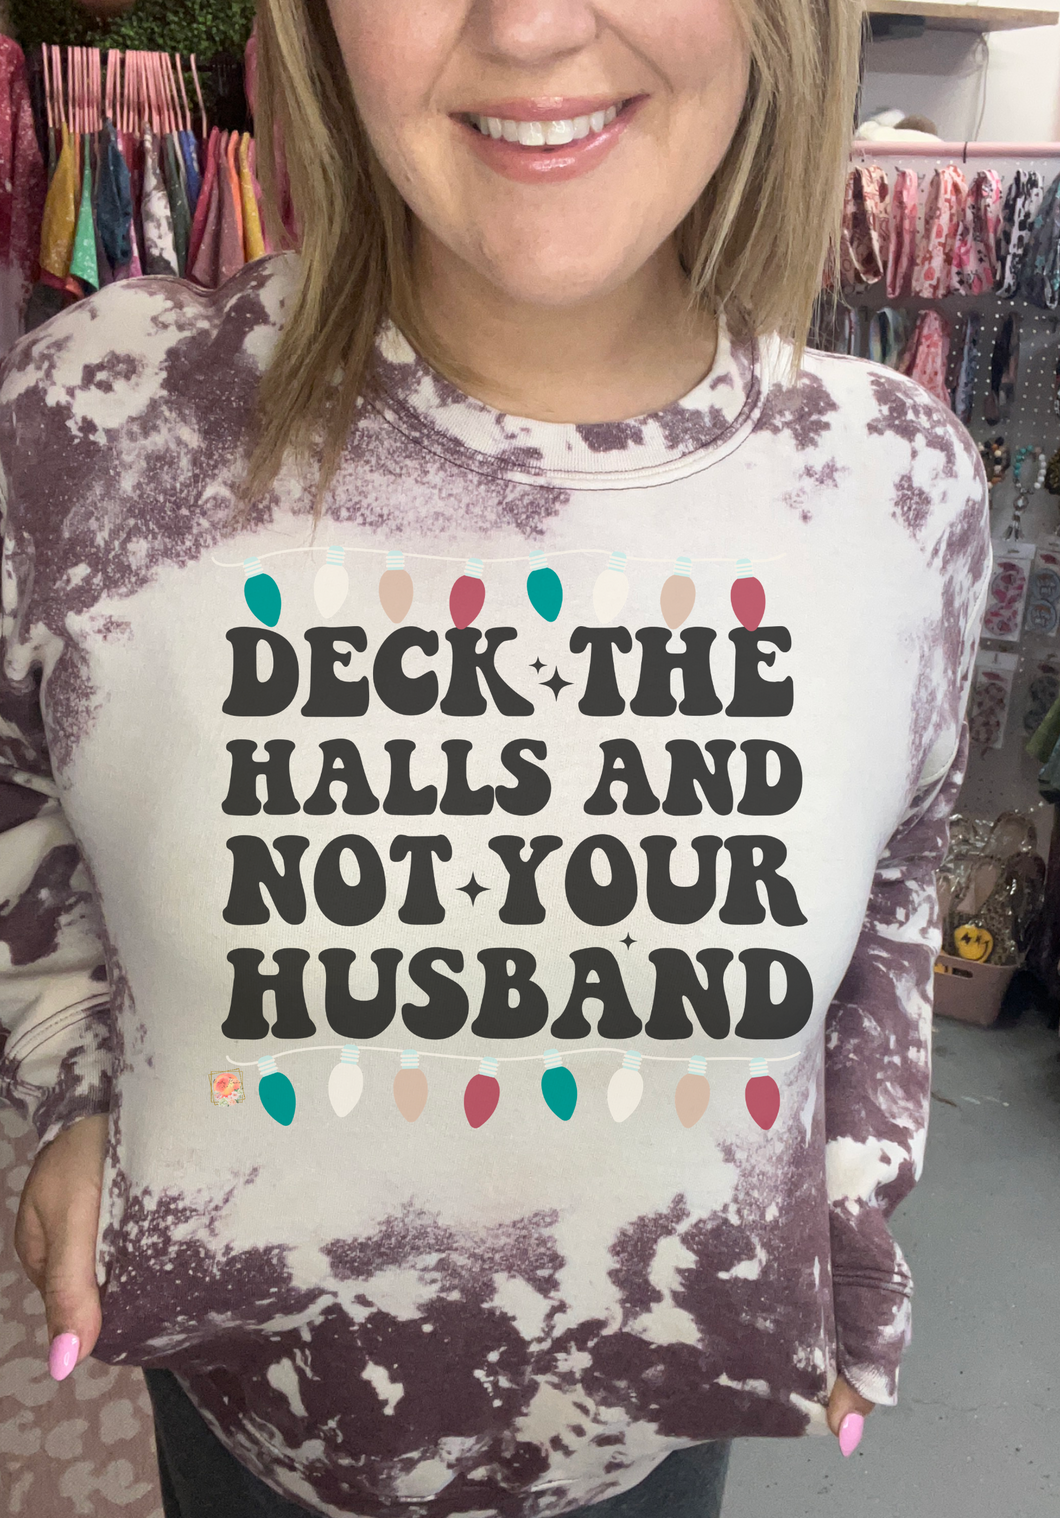 Deck the halls as not your husband/baby daddy